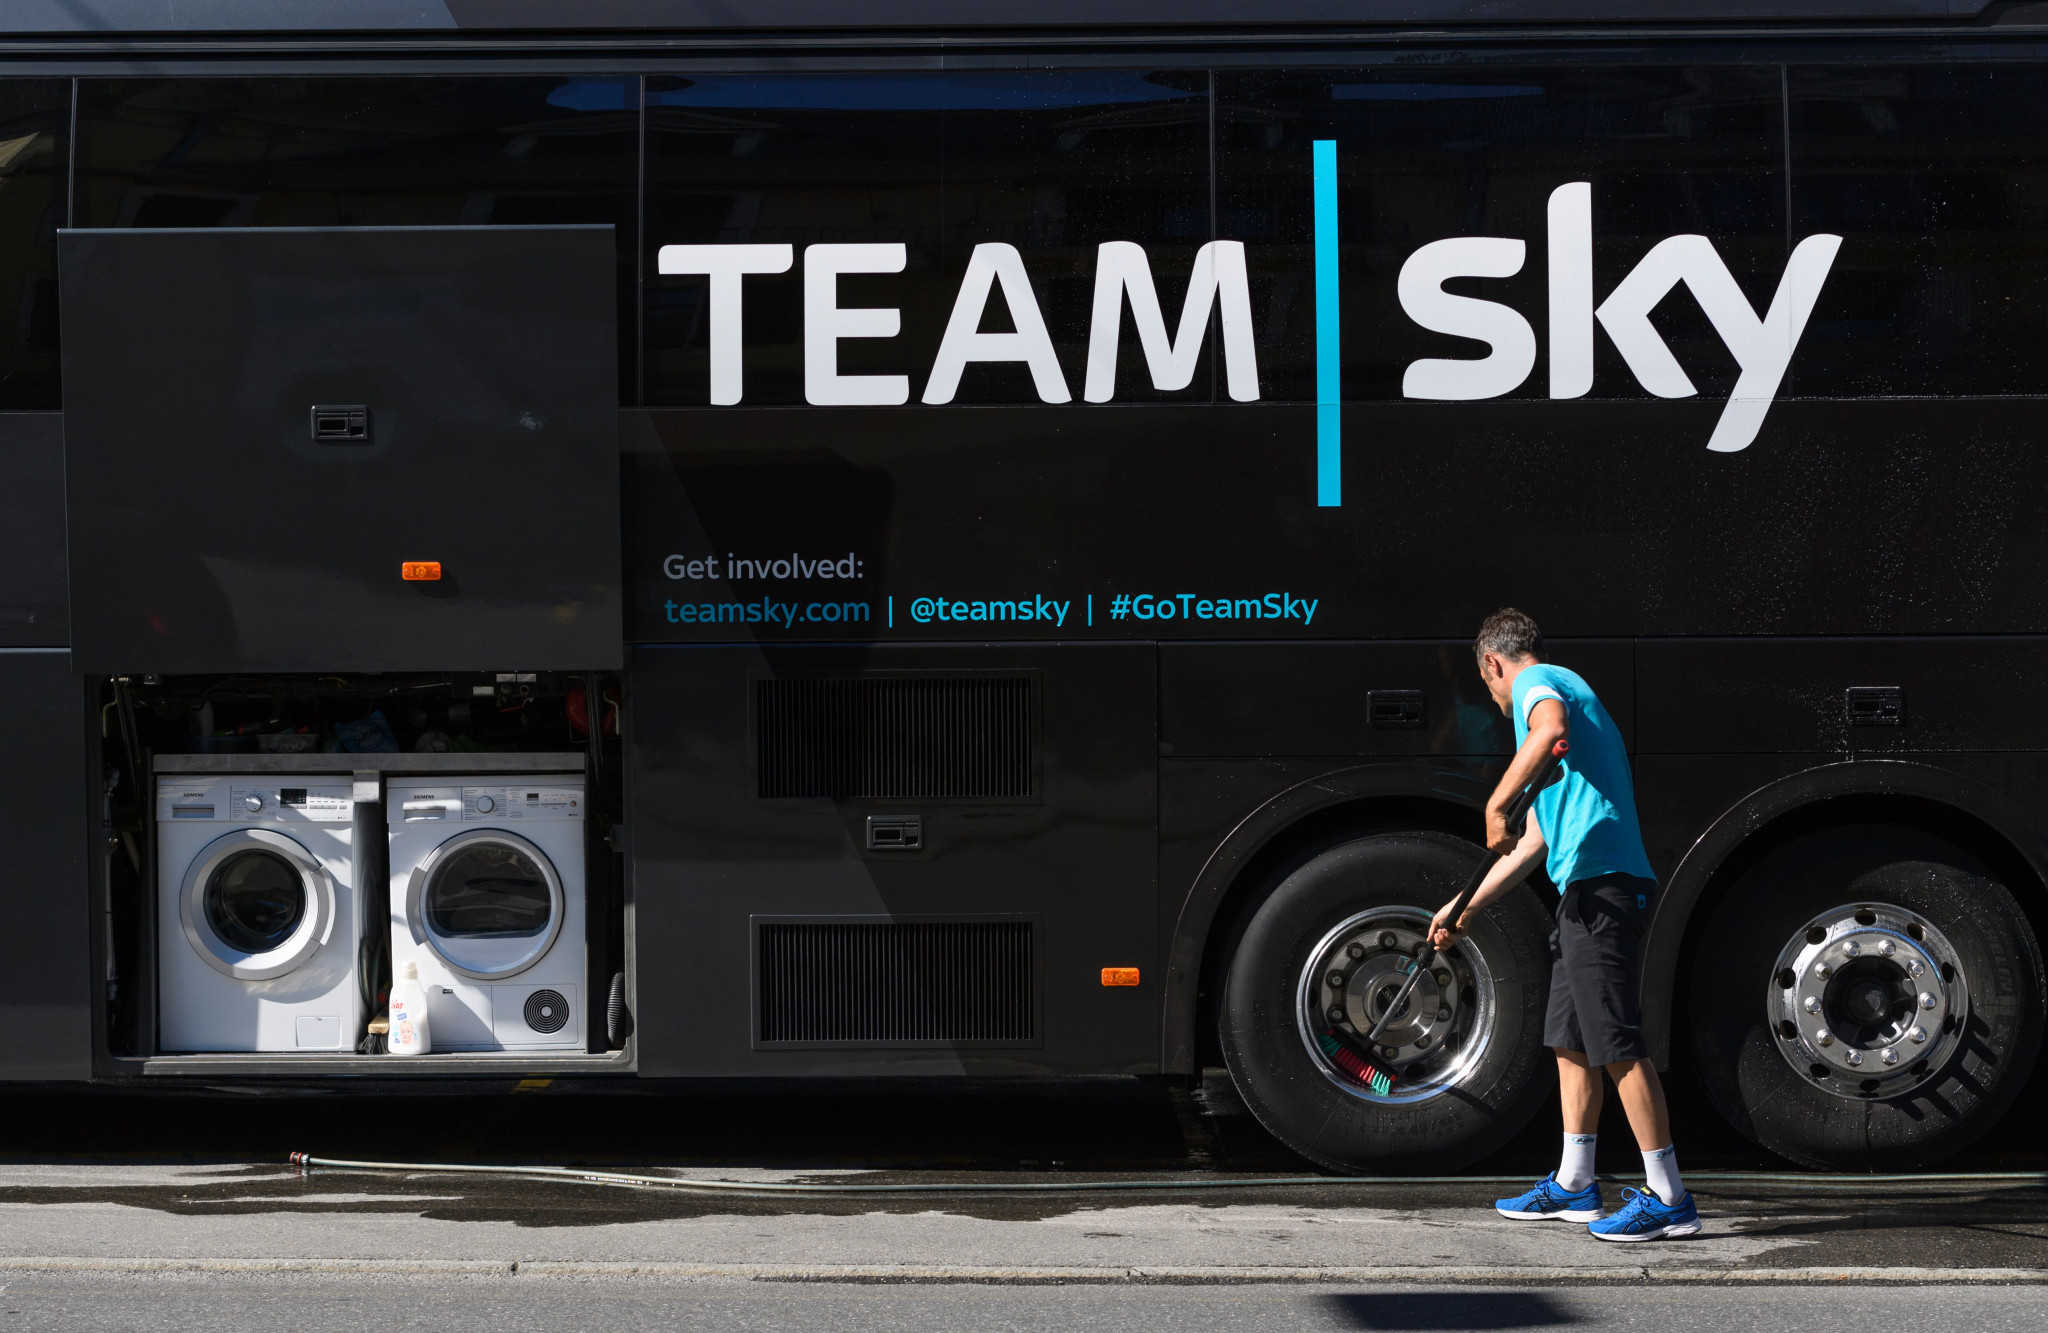 Richard Freeman worked for the highly-successful Team Sky outfit